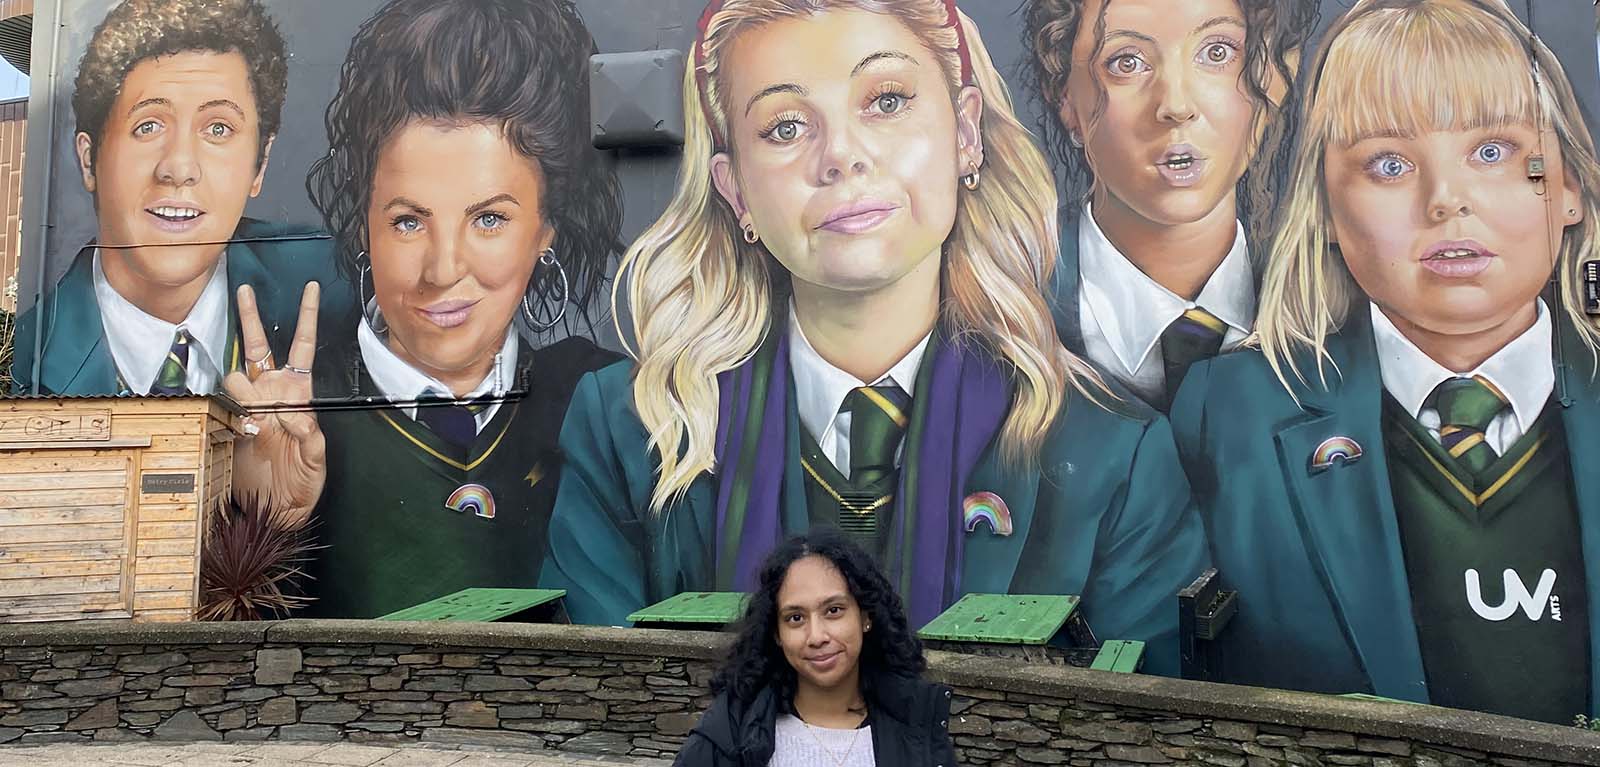 Sumita in front of the Derry Girls mural